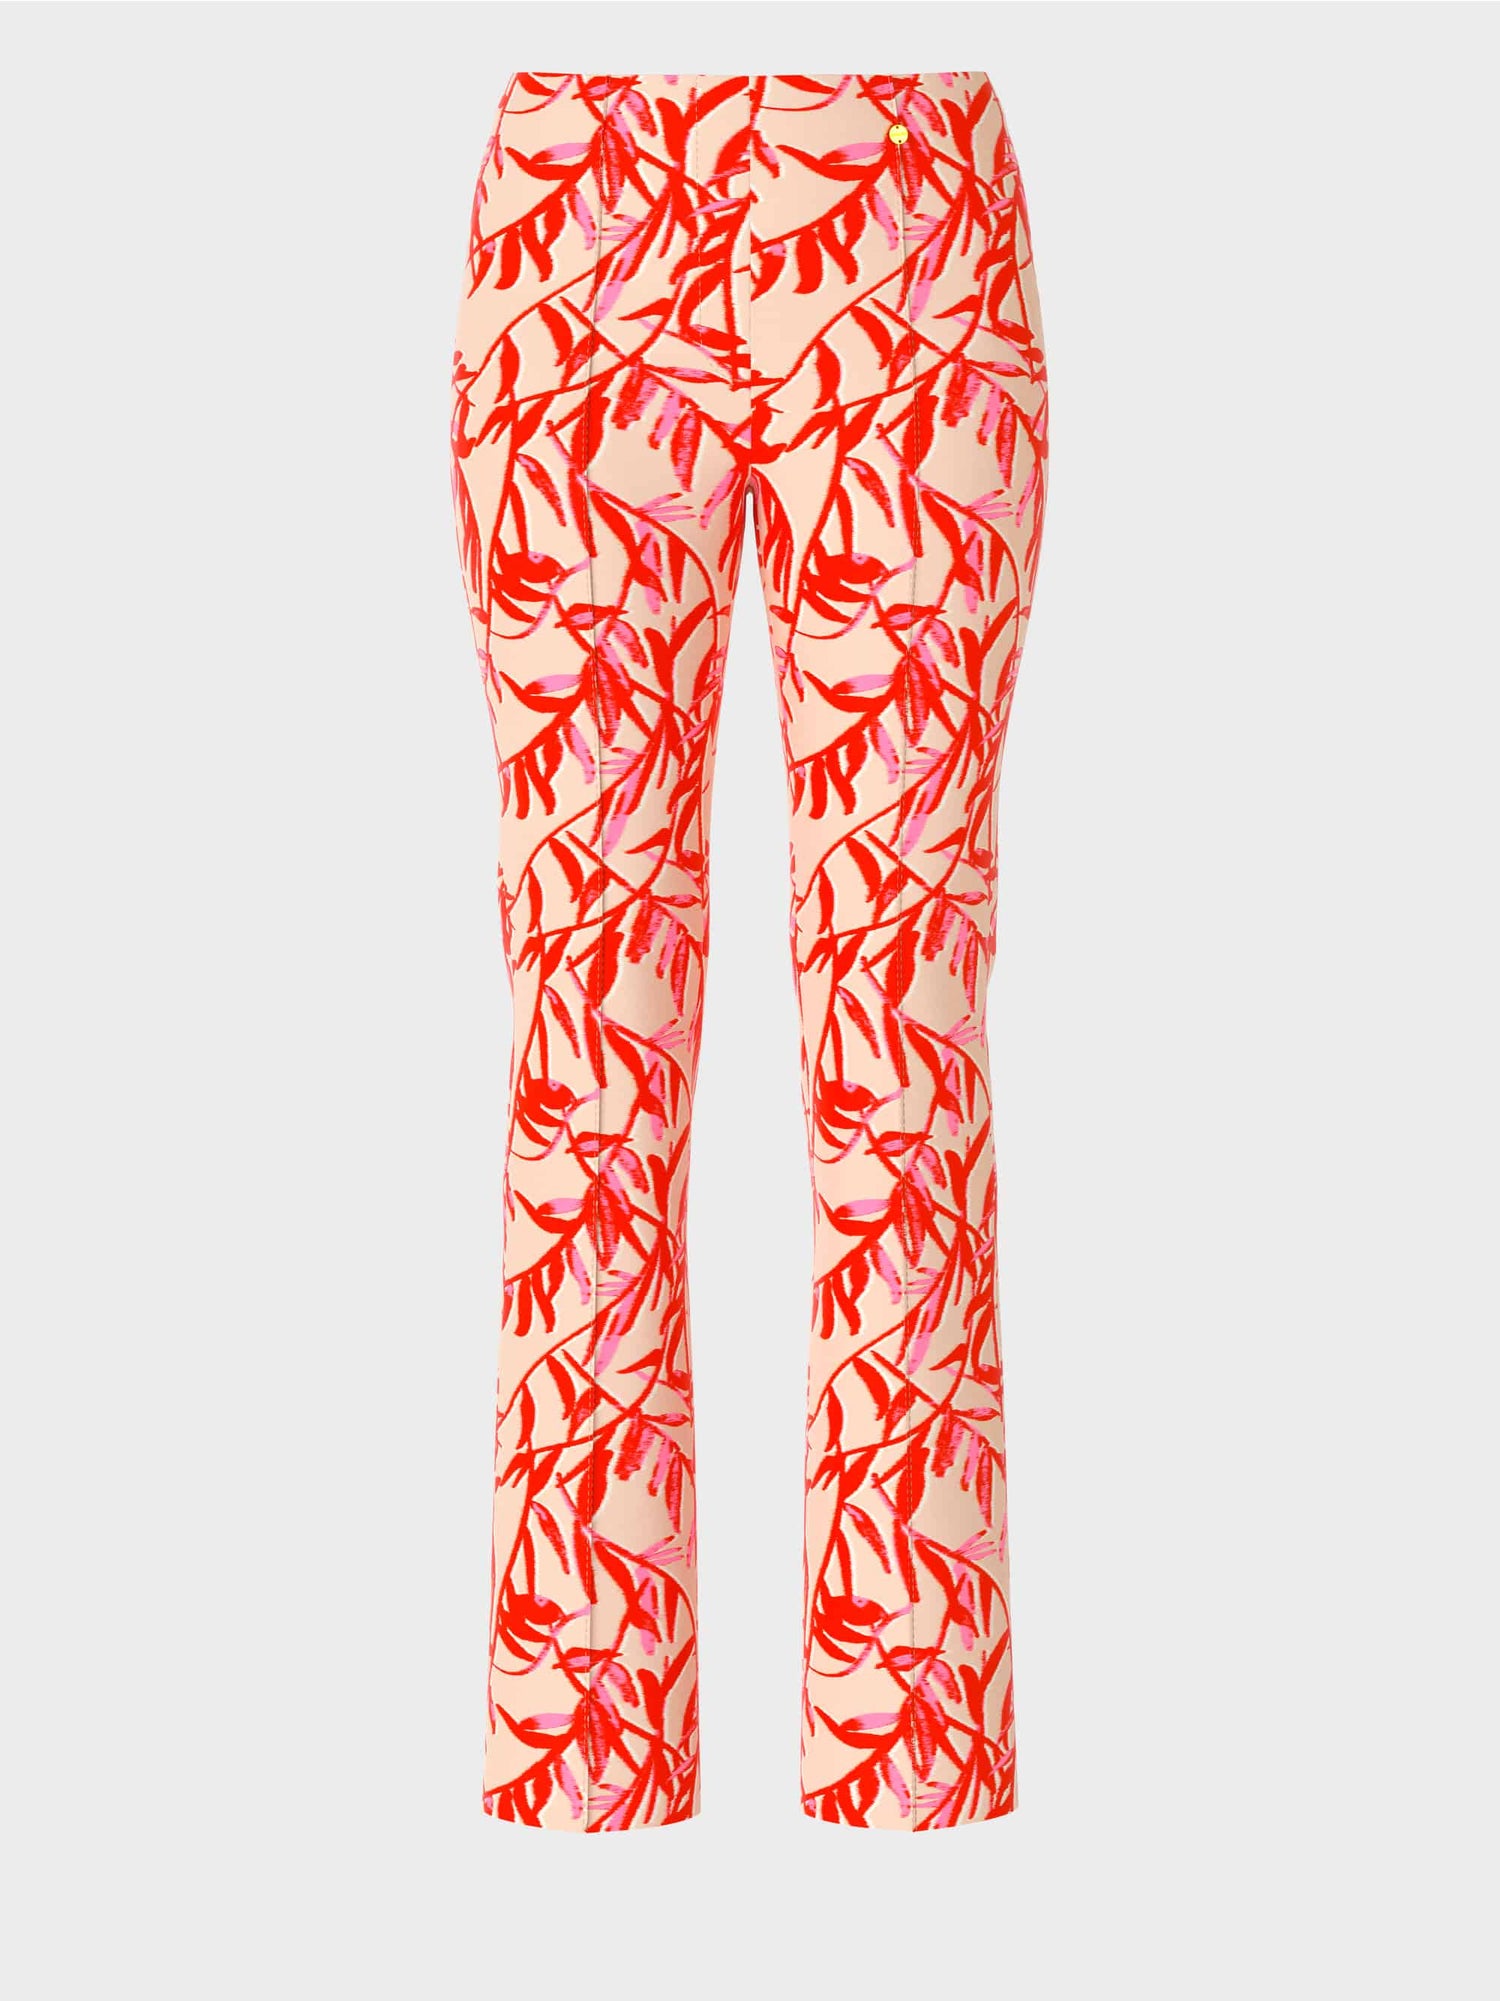 Pants In A Floral Print